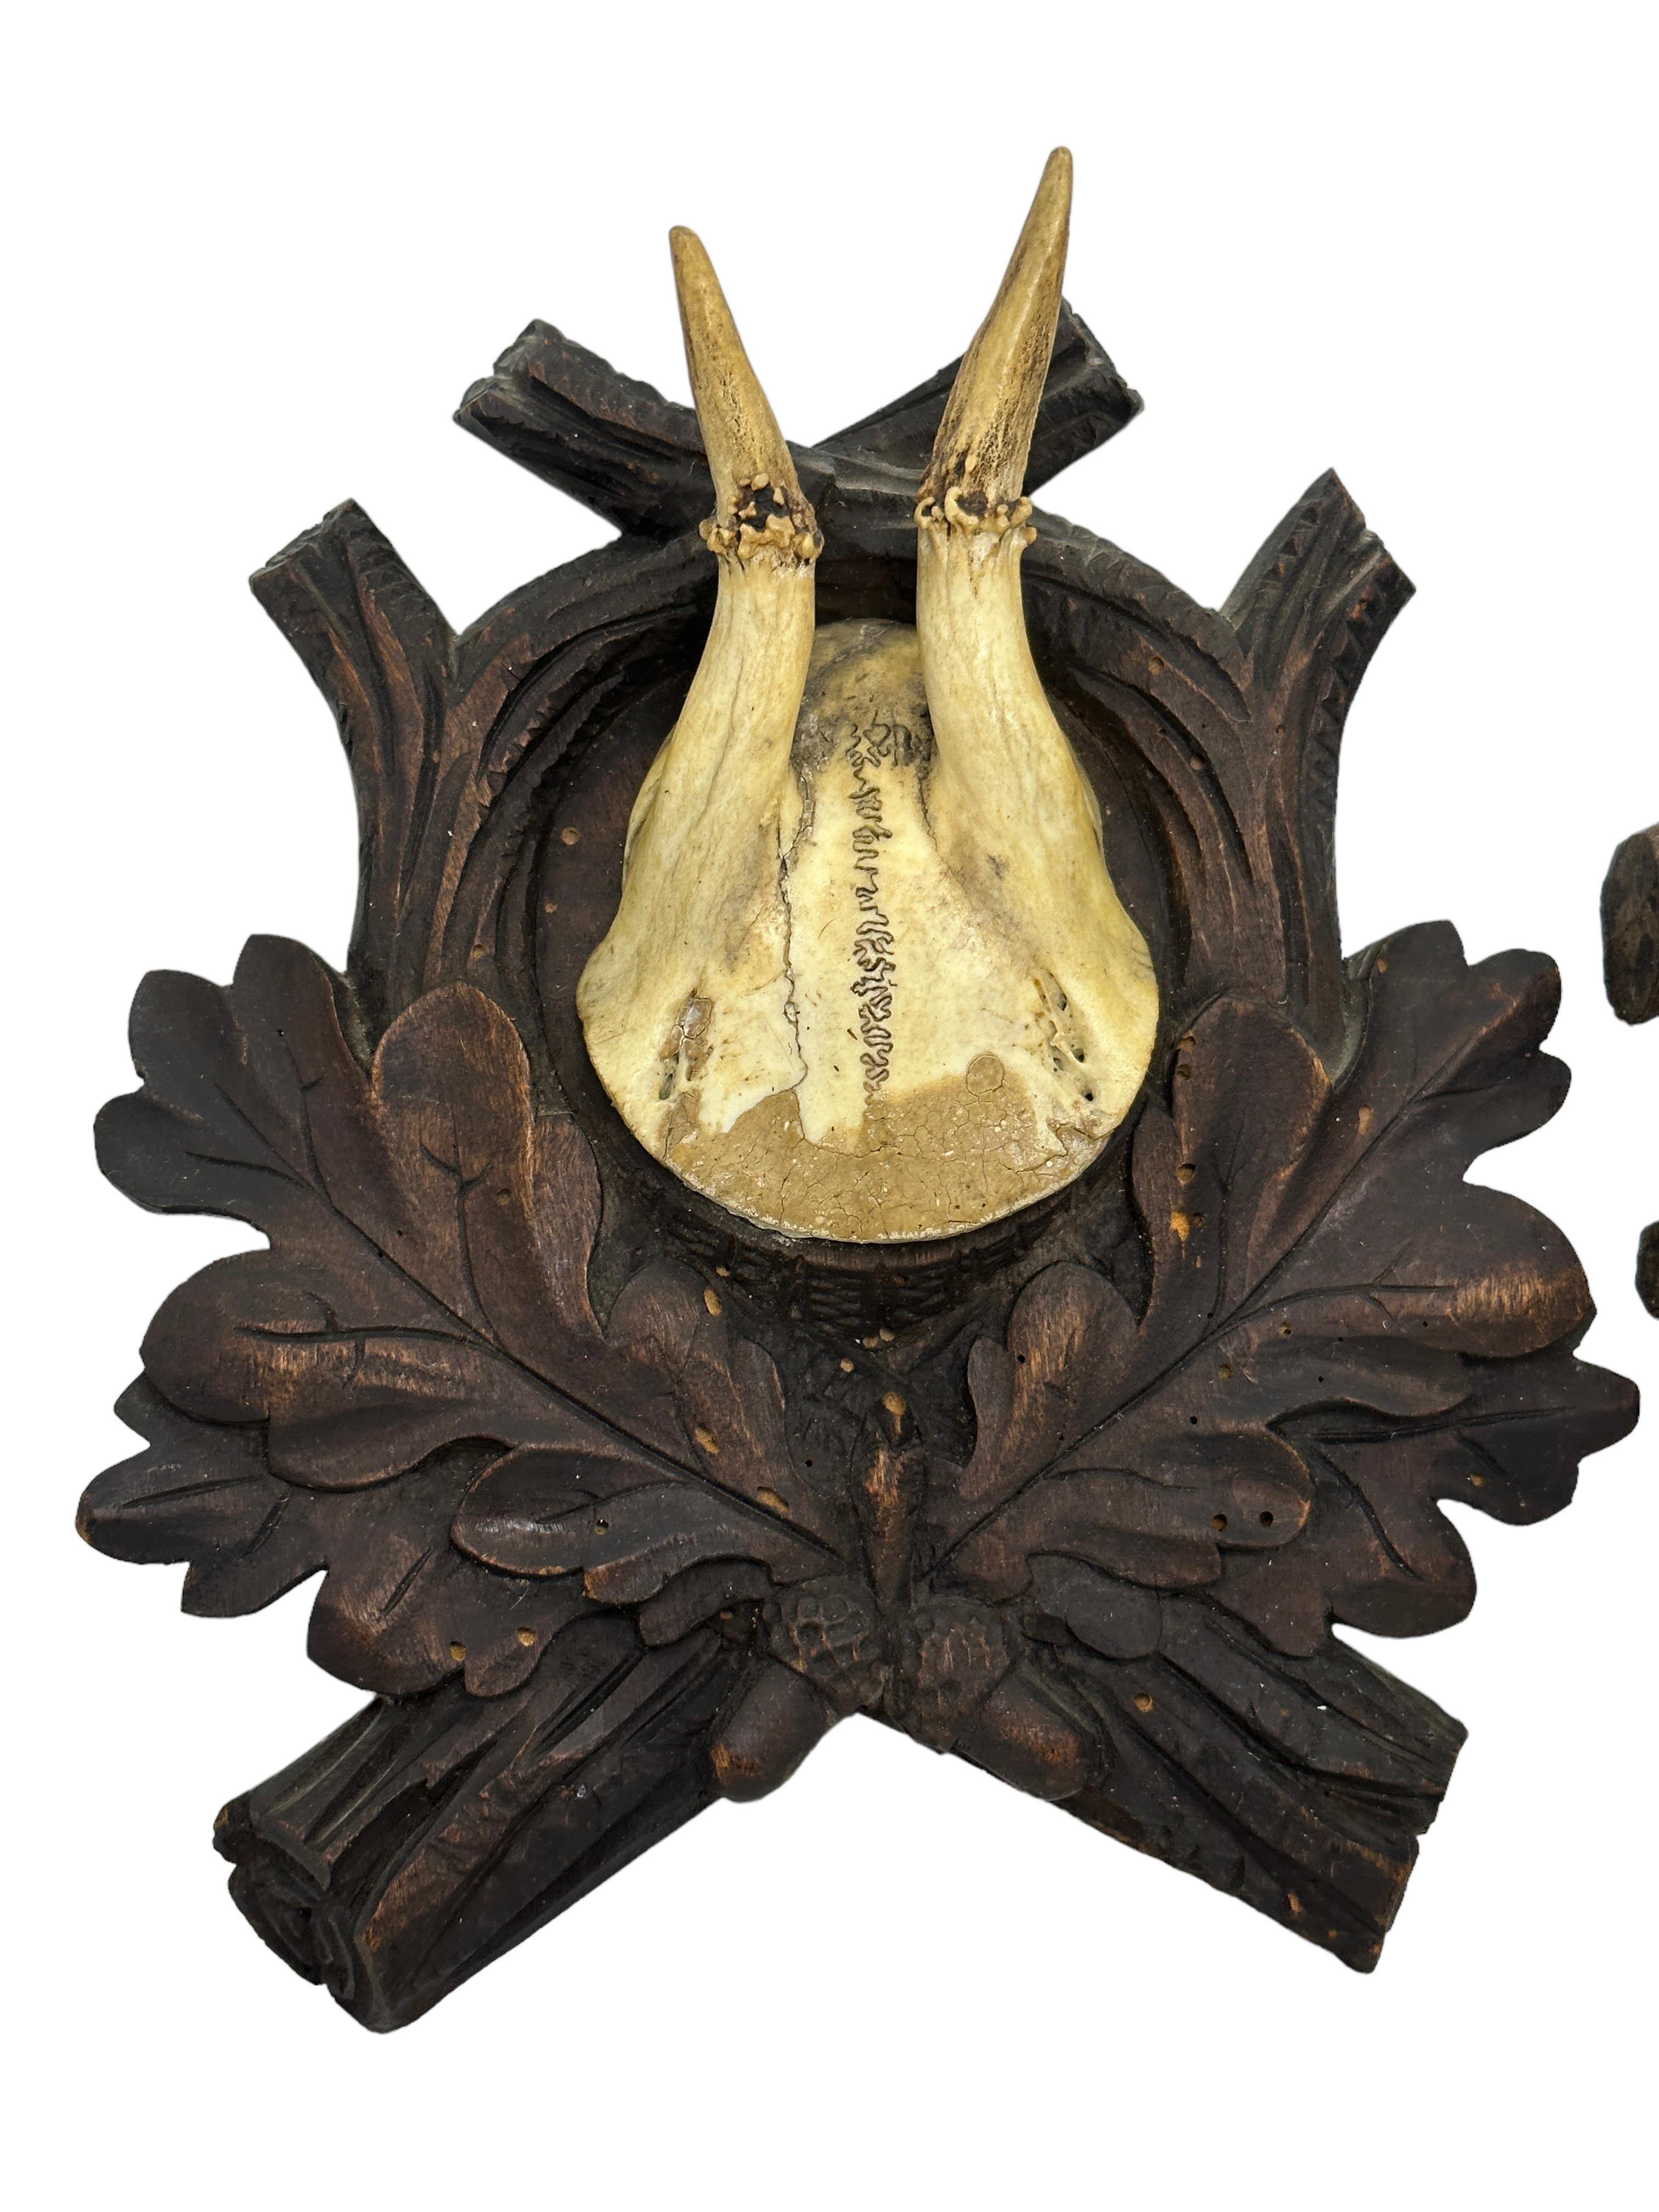 A set of two vintage Black Forest deer antler trophies on hand carved, Black Forest wooden plaques. I think they are from the early 20th Century. Measurement's given in dimensions section refers to the tallest item. A nice addition to your hunters